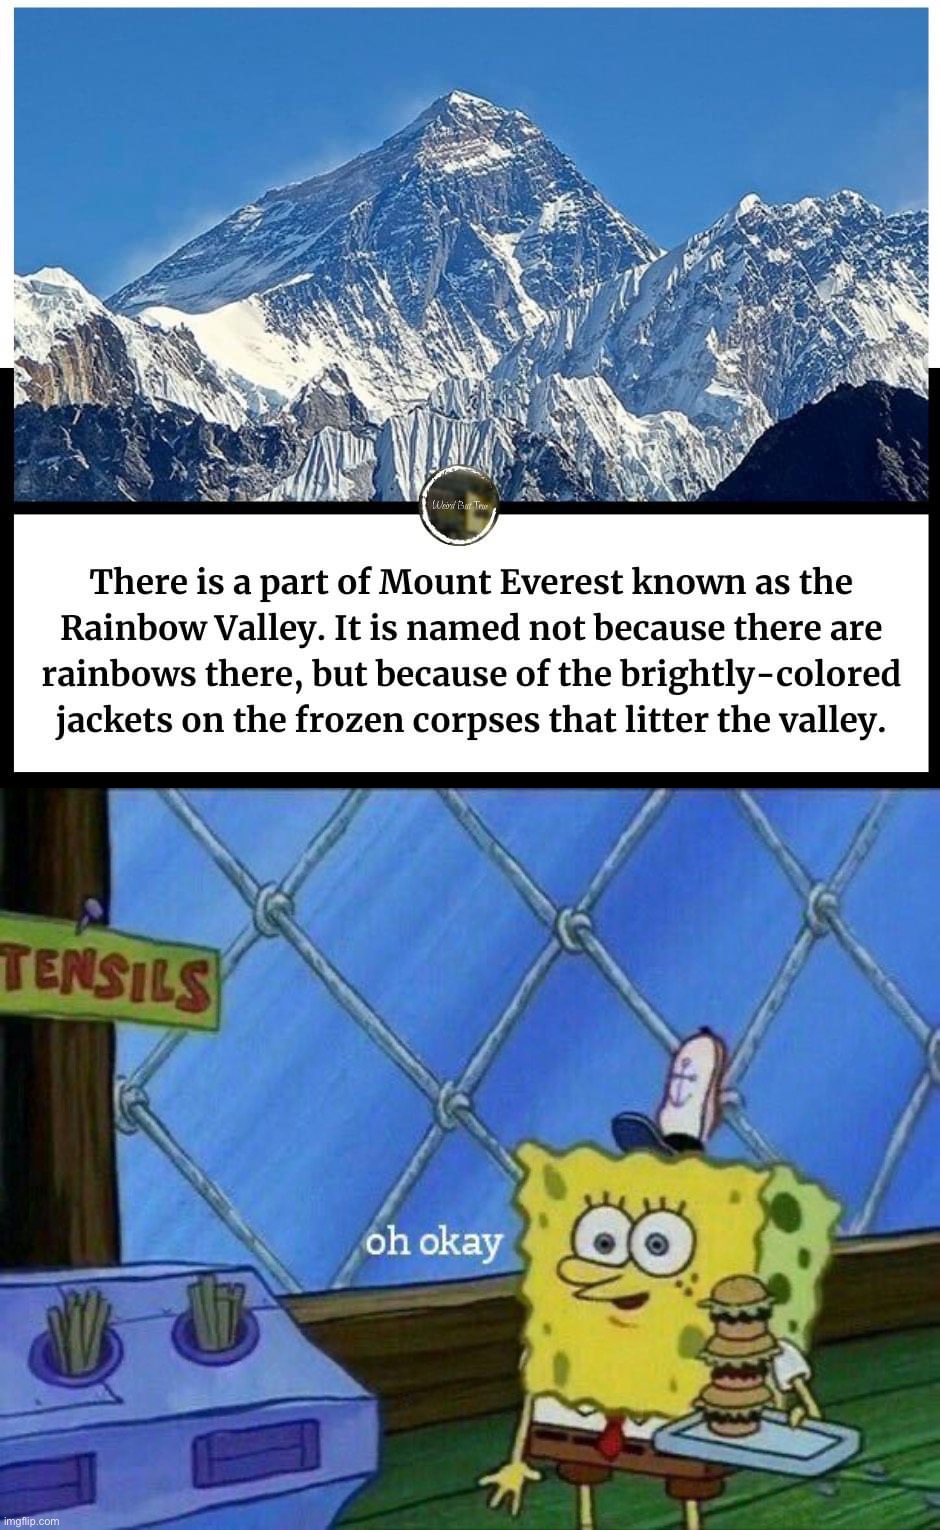 Don’t simp for mountains. Not even once. #psa #dontbeasimp | image tagged in mount everest rainbow valley,oh okay,psa,public service announcement,mount everest,dont be a simp | made w/ Imgflip meme maker